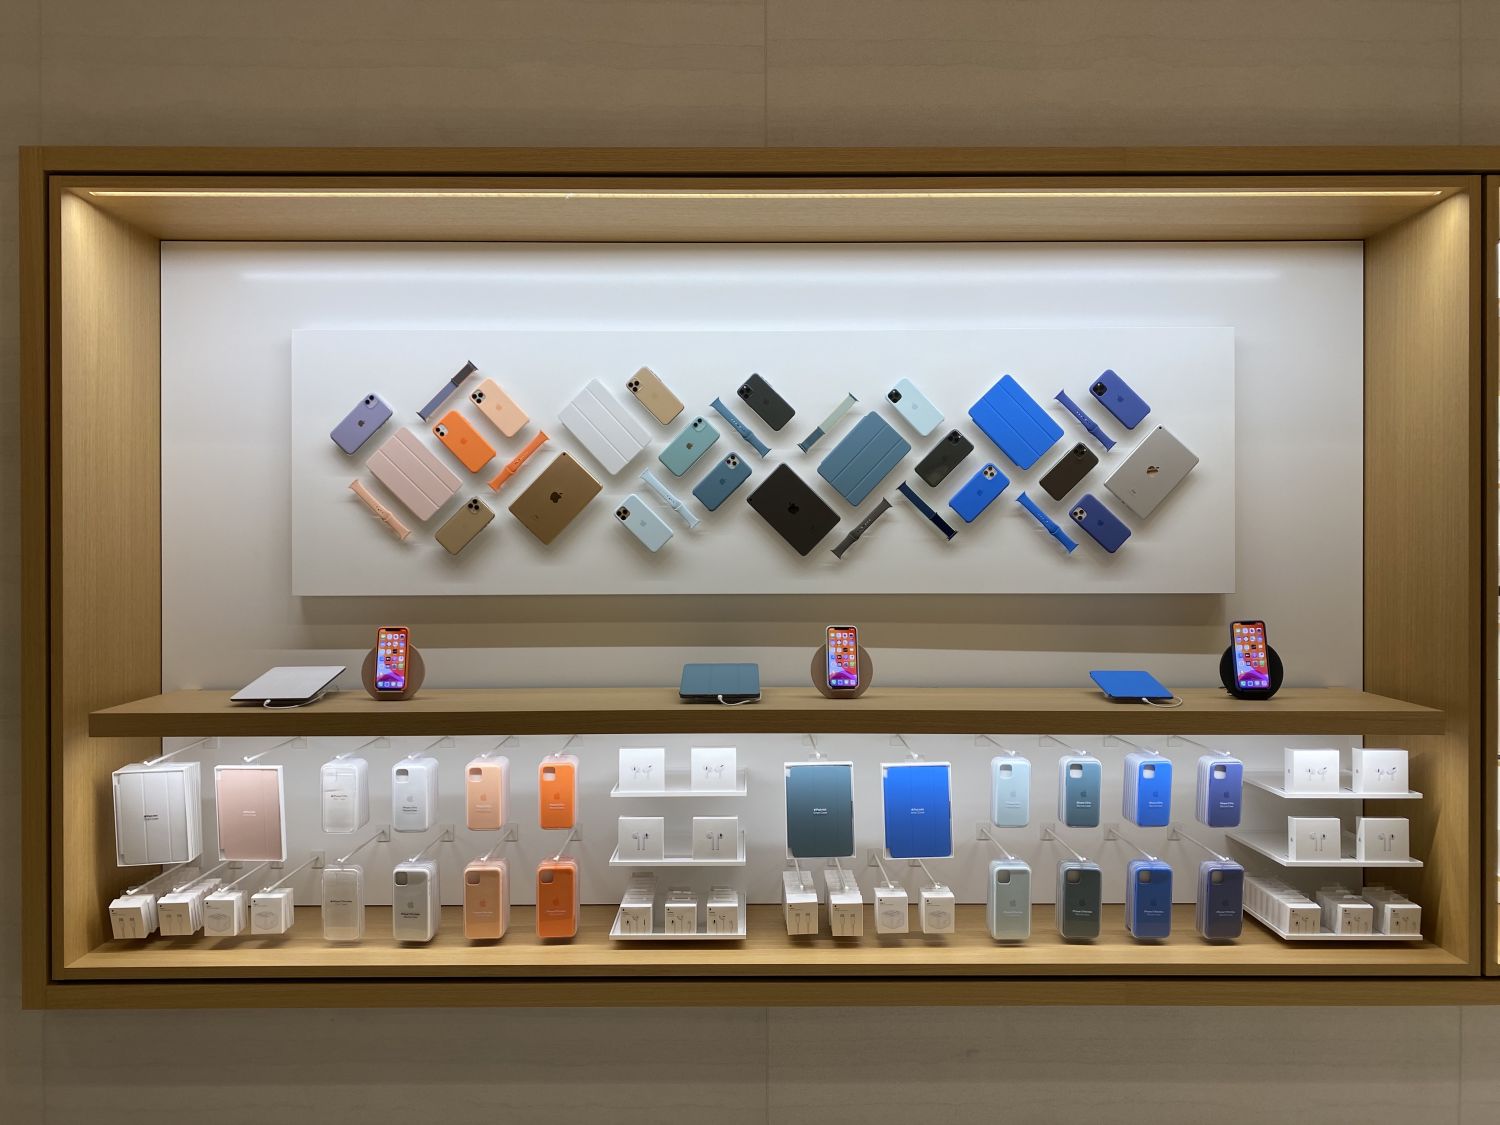 Inside Apple's Singapore Marina Bay Sands retail store - General Discussion  Discussions on AppleInsider Forums